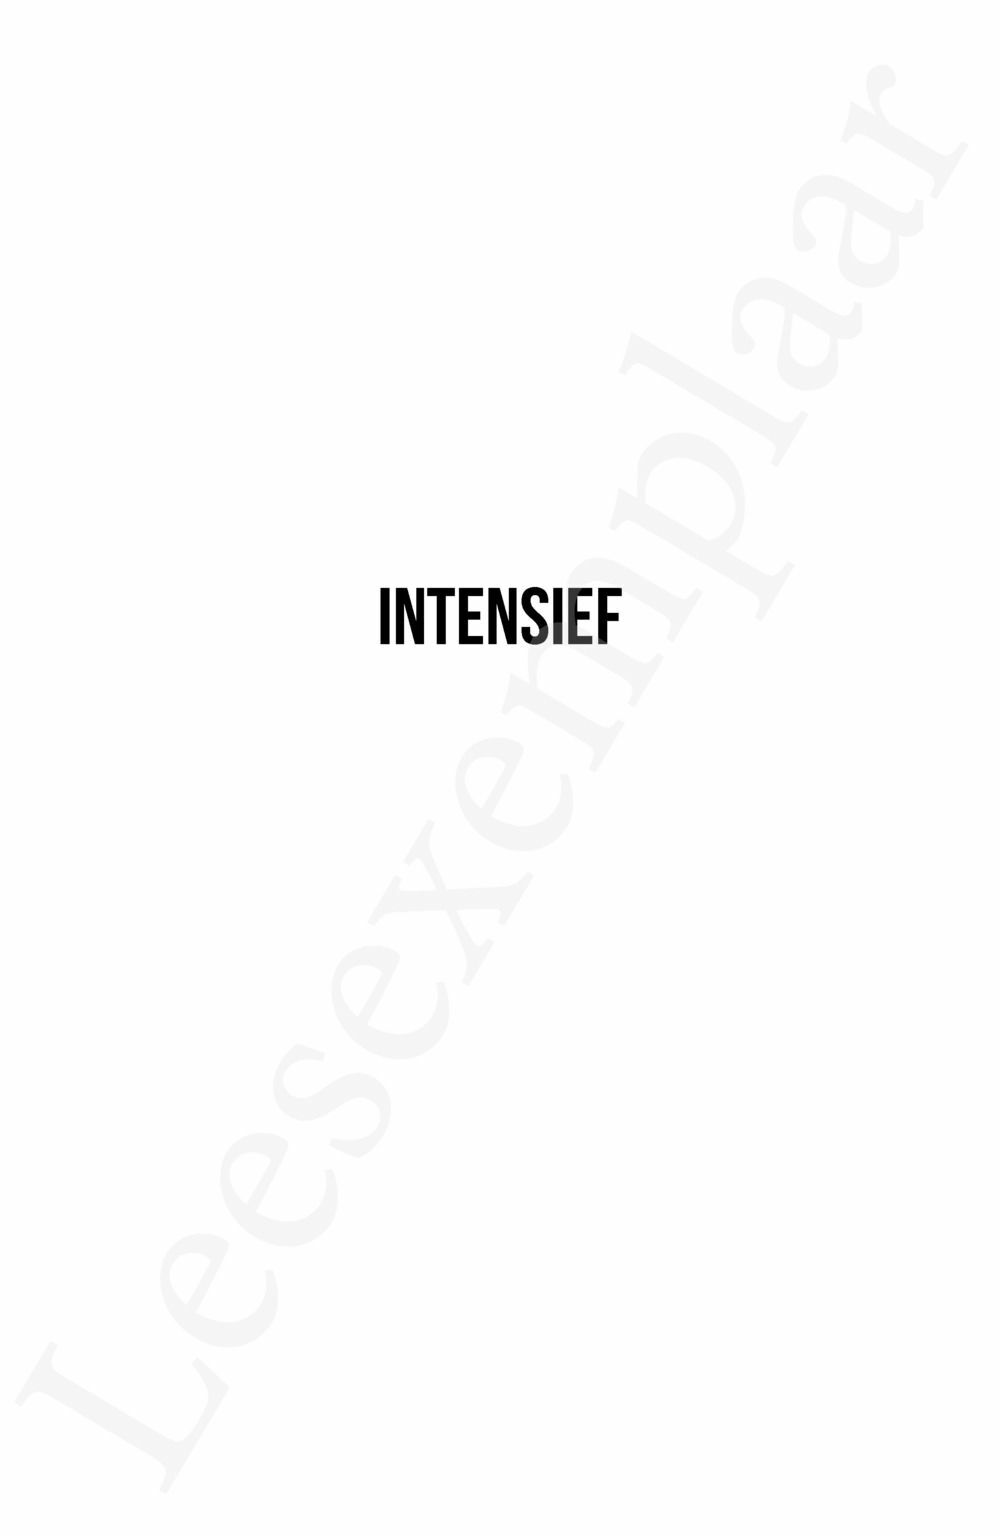 Preview: INTENSIEF